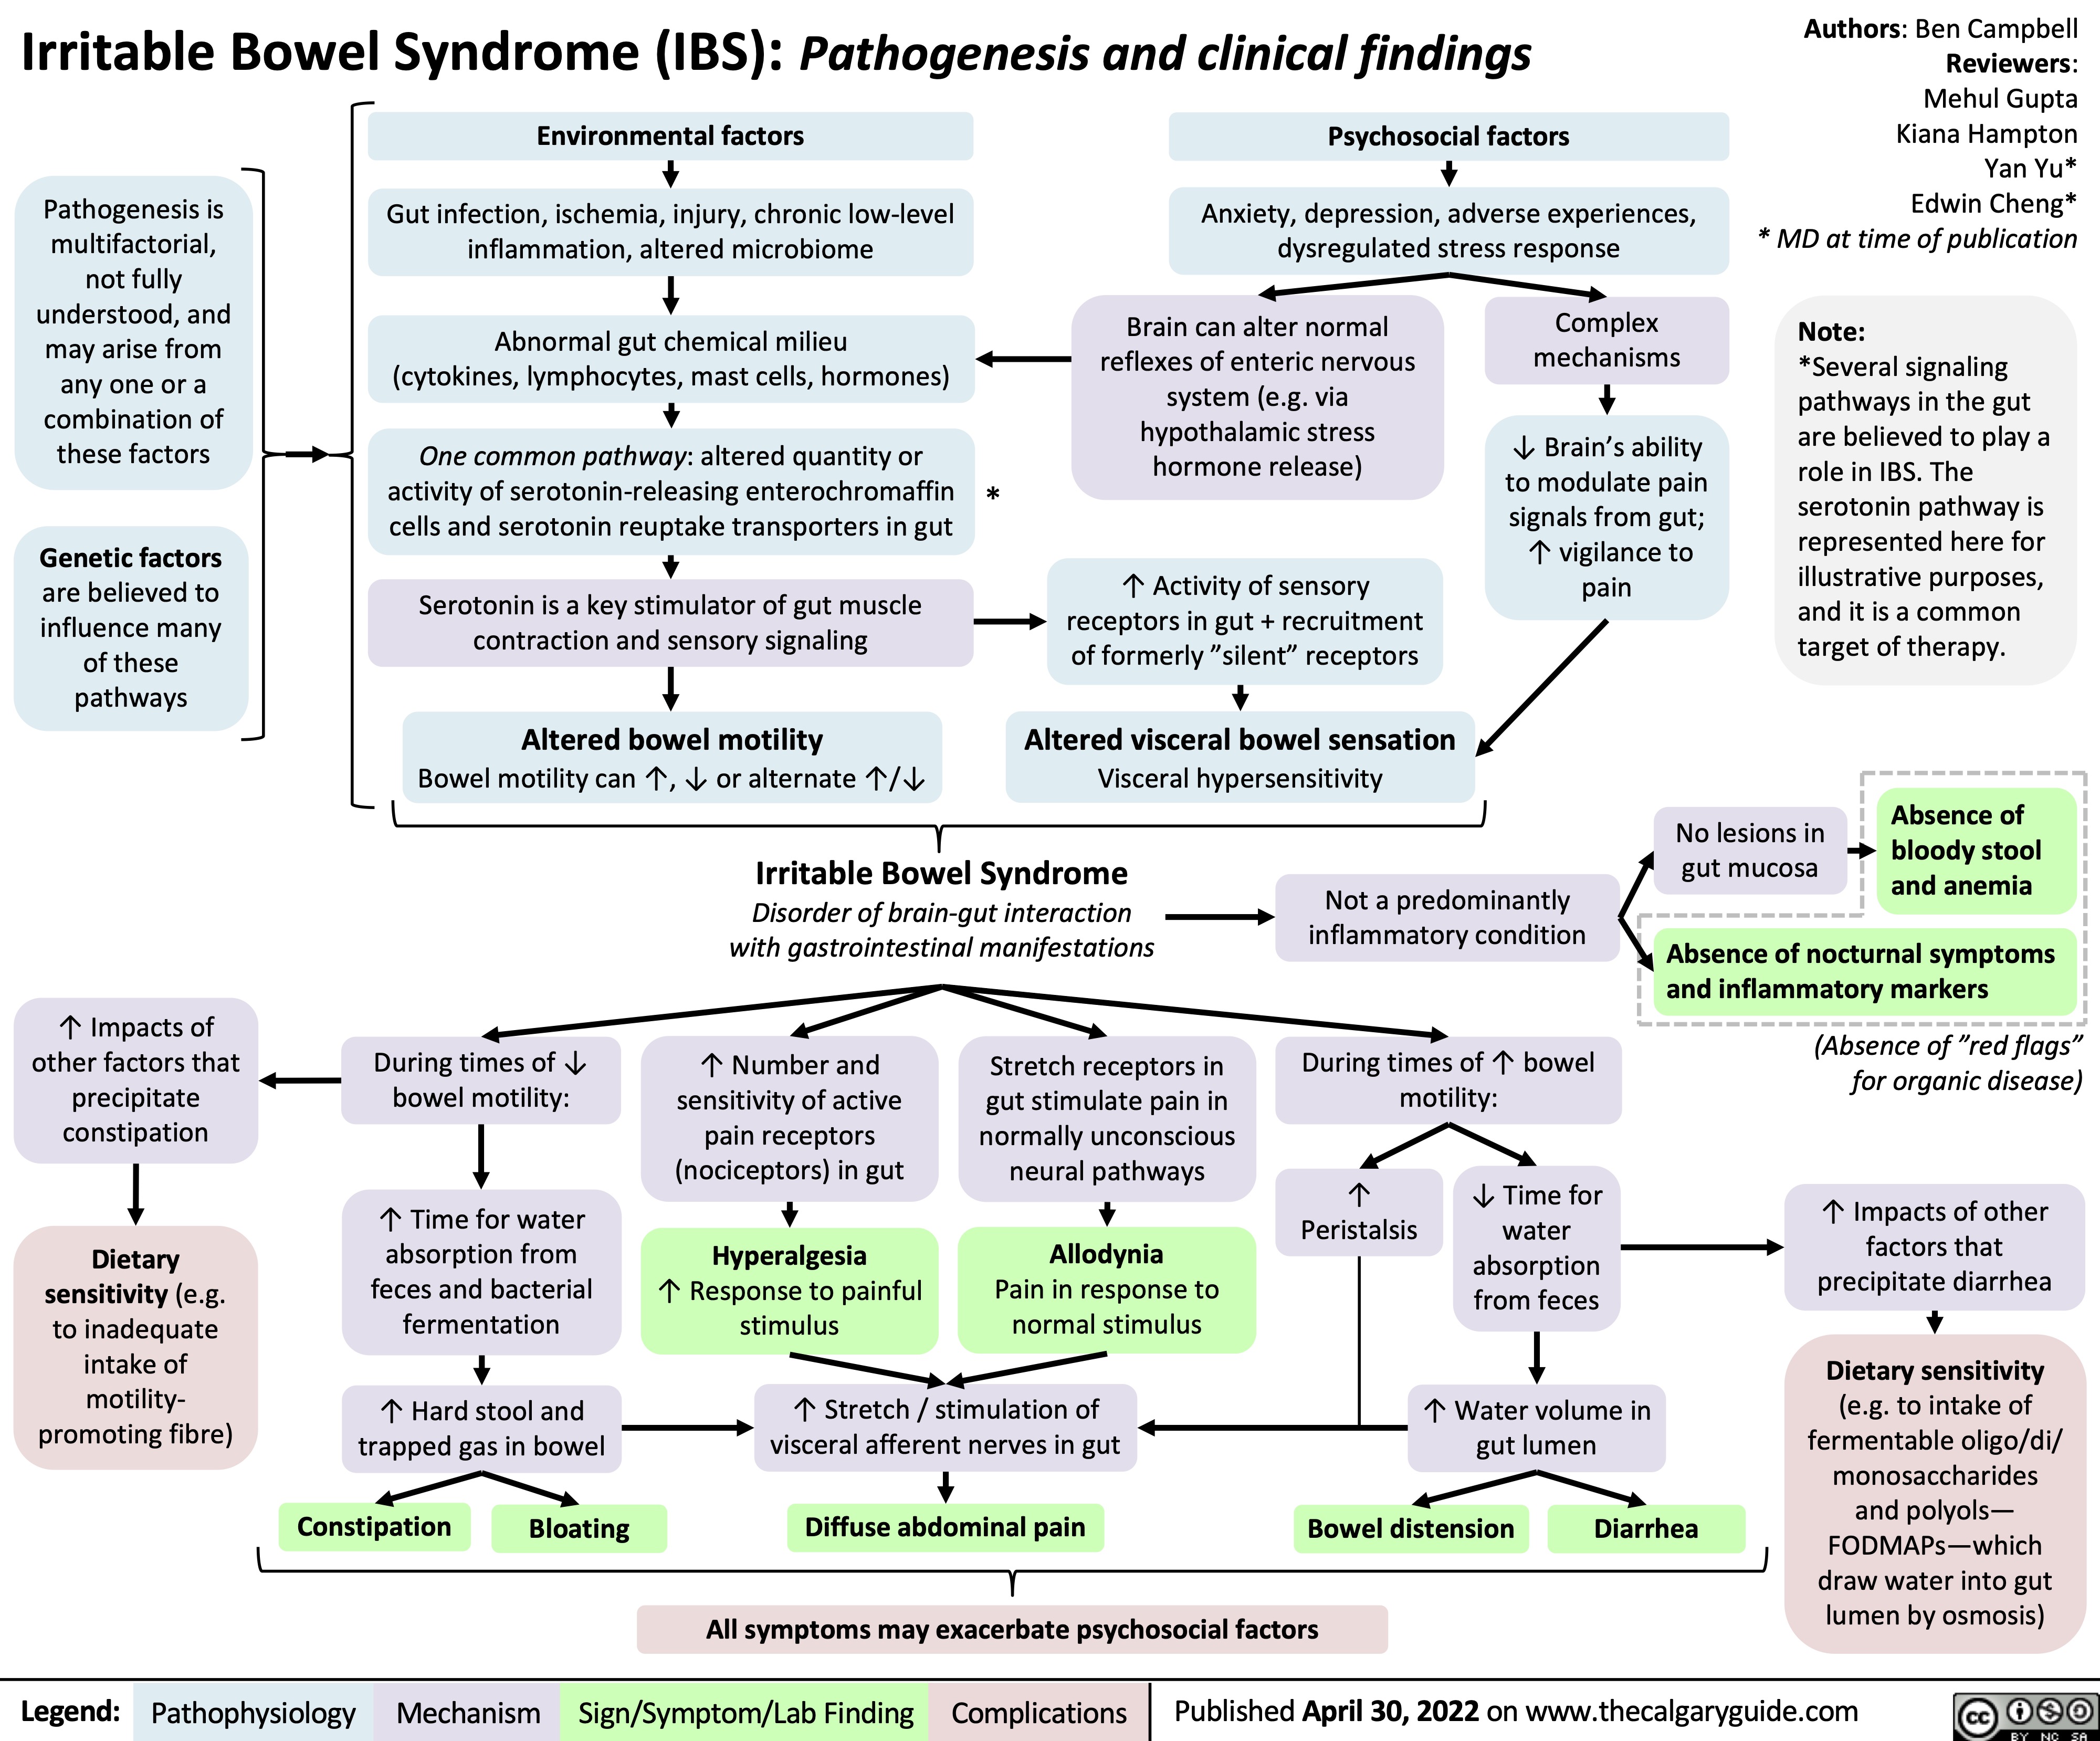 Irritable Bowel Syndrome (IBS): Pathogenesis and clinical findings
Authors: Ben Campbell Reviewers: Mehul Gupta Kiana Hampton Yan Yu* Edwin Cheng* * MD at time of publication
Note:
*Several signaling pathways in the gut are believed to play a role in IBS. The serotonin pathway is represented here for illustrative purposes, and it is a common target of therapy.
       Pathogenesis is multifactorial, not fully understood, and may arise from any one or a combination of these factors
Genetic factors
are believed to influence many of these pathways
Environmental factors
Gut infection, ischemia, injury, chronic low-level inflammation, altered microbiome
Abnormal gut chemical milieu (cytokines, lymphocytes, mast cells, hormones)
One common pathway: altered quantity or activity of serotonin-releasing enterochromaffin * cells and serotonin reuptake transporters in gut
Serotonin is a key stimulator of gut muscle contraction and sensory signaling
Altered bowel motility
Bowel motility can ↑, ↓ or alternate ↑/↓
Psychosocial factors
Anxiety, depression, adverse experiences, dysregulated stress response
    Brain can alter normal reflexes of enteric nervous system (e.g. via hypothalamic stress hormone release)
↑ Activity of sensory receptors in gut + recruitment of formerly ”silent” receptors
Altered visceral bowel sensation
Visceral hypersensitivity
Complex mechanisms
↓ Brain’s ability to modulate pain signals from gut;
↑ vigilance to pain
             Irritable Bowel Syndrome
Disorder of brain-gut interaction with gastrointestinal manifestations
Not a predominantly inflammatory condition
During times of ↑ bowel motility:
No lesions in gut mucosa
(Absence of ”red flags” for organic disease)
↑ Impacts of other factors that precipitate diarrhea
Dietary sensitivity
(e.g. to intake of fermentable oligo/di/ monosaccharides and polyols— FODMAPs—which draw water into gut lumen by osmosis)
     ↑ Impacts of other factors that precipitate constipation
Dietary sensitivity (e.g. to inadequate intake of motility- promoting fibre)
During times of ↓ bowel motility:
↑ Time for water absorption from feces and bacterial fermentation
↑ Hard stool and trapped gas in bowel
↑ Number and sensitivity of active pain receptors (nociceptors) in gut
Hyperalgesia
↑ Response to painful stimulus
Stretch receptors in gut stimulate pain in normally unconscious neural pathways
Allodynia
Pain in response to normal stimulus
↑ Peristalsis
↓ Time for water absorption from feces
↑ Water volume in gut lumen
                   ↑ Stretch / stimulation of visceral afferent nerves in gut
Absence of bloody stool and anemia
Absence of nocturnal symptoms and inflammatory markers
         Constipation
Bloating
Diffuse abdominal pain
All symptoms may exacerbate psychosocial factors
Bowel distension
Diarrhea
   Legend:
 Pathophysiology
Mechanism
Sign/Symptom/Lab Finding
 Complications
Published April 30, 2022 on www.thecalgaryguide.com
    